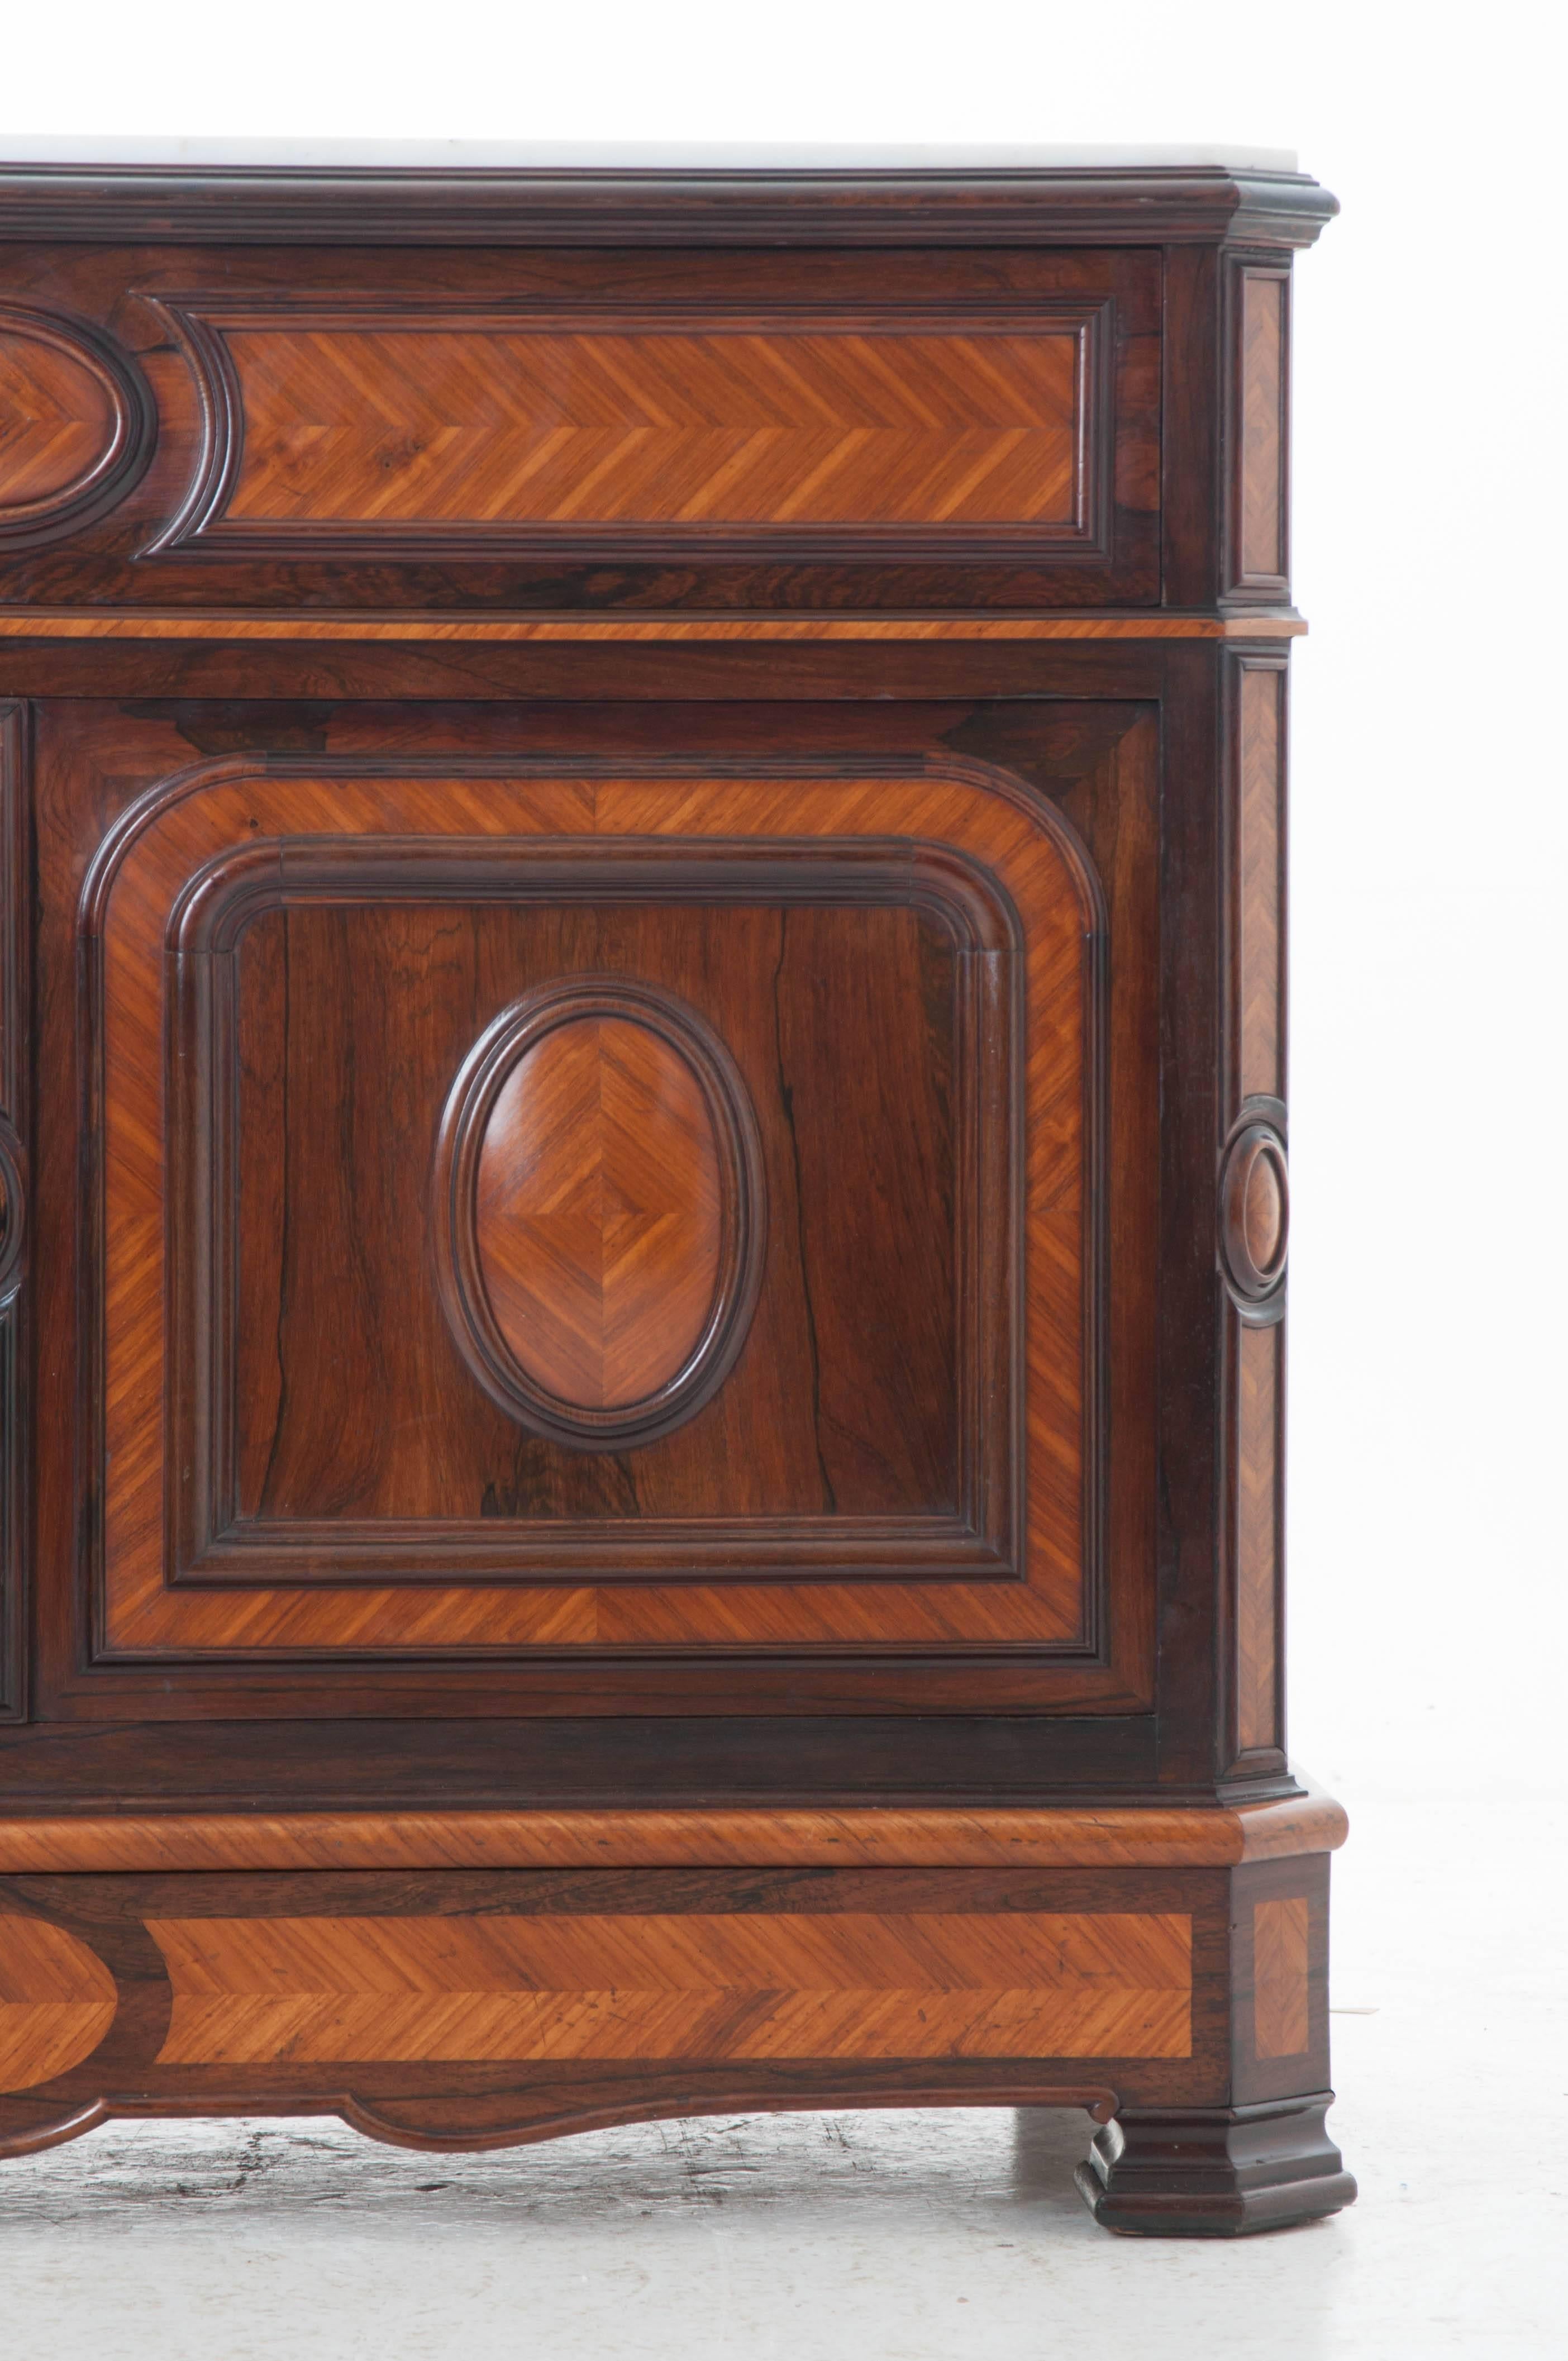 A masterfully inlaid walnut and rosewood drop front desk with marble top from 19th century, France. The white marble top is in great antique condition with canted front corners shaped to fit this piece. This exceptional antique features a drop front